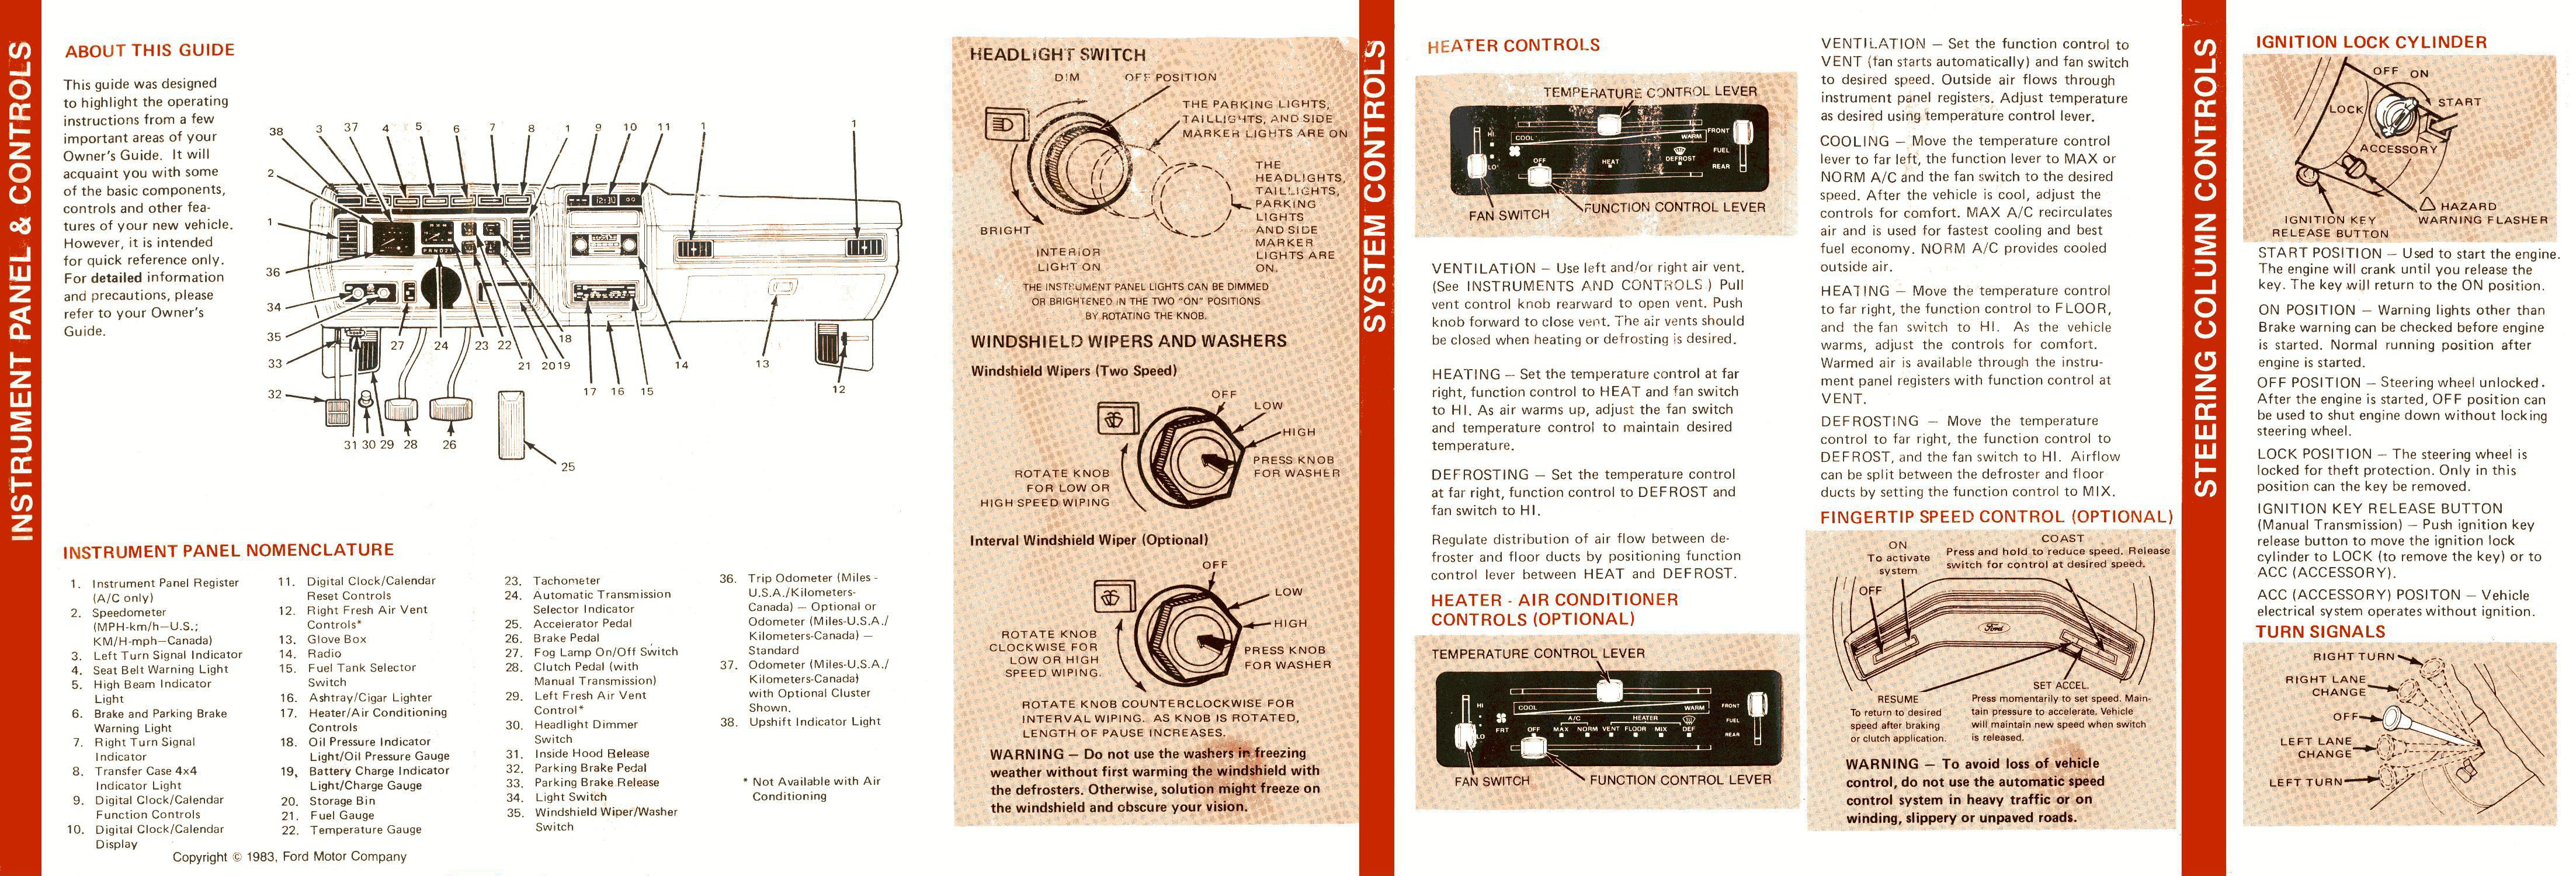 1984_Ford_F_Series_Operating_Guide-02